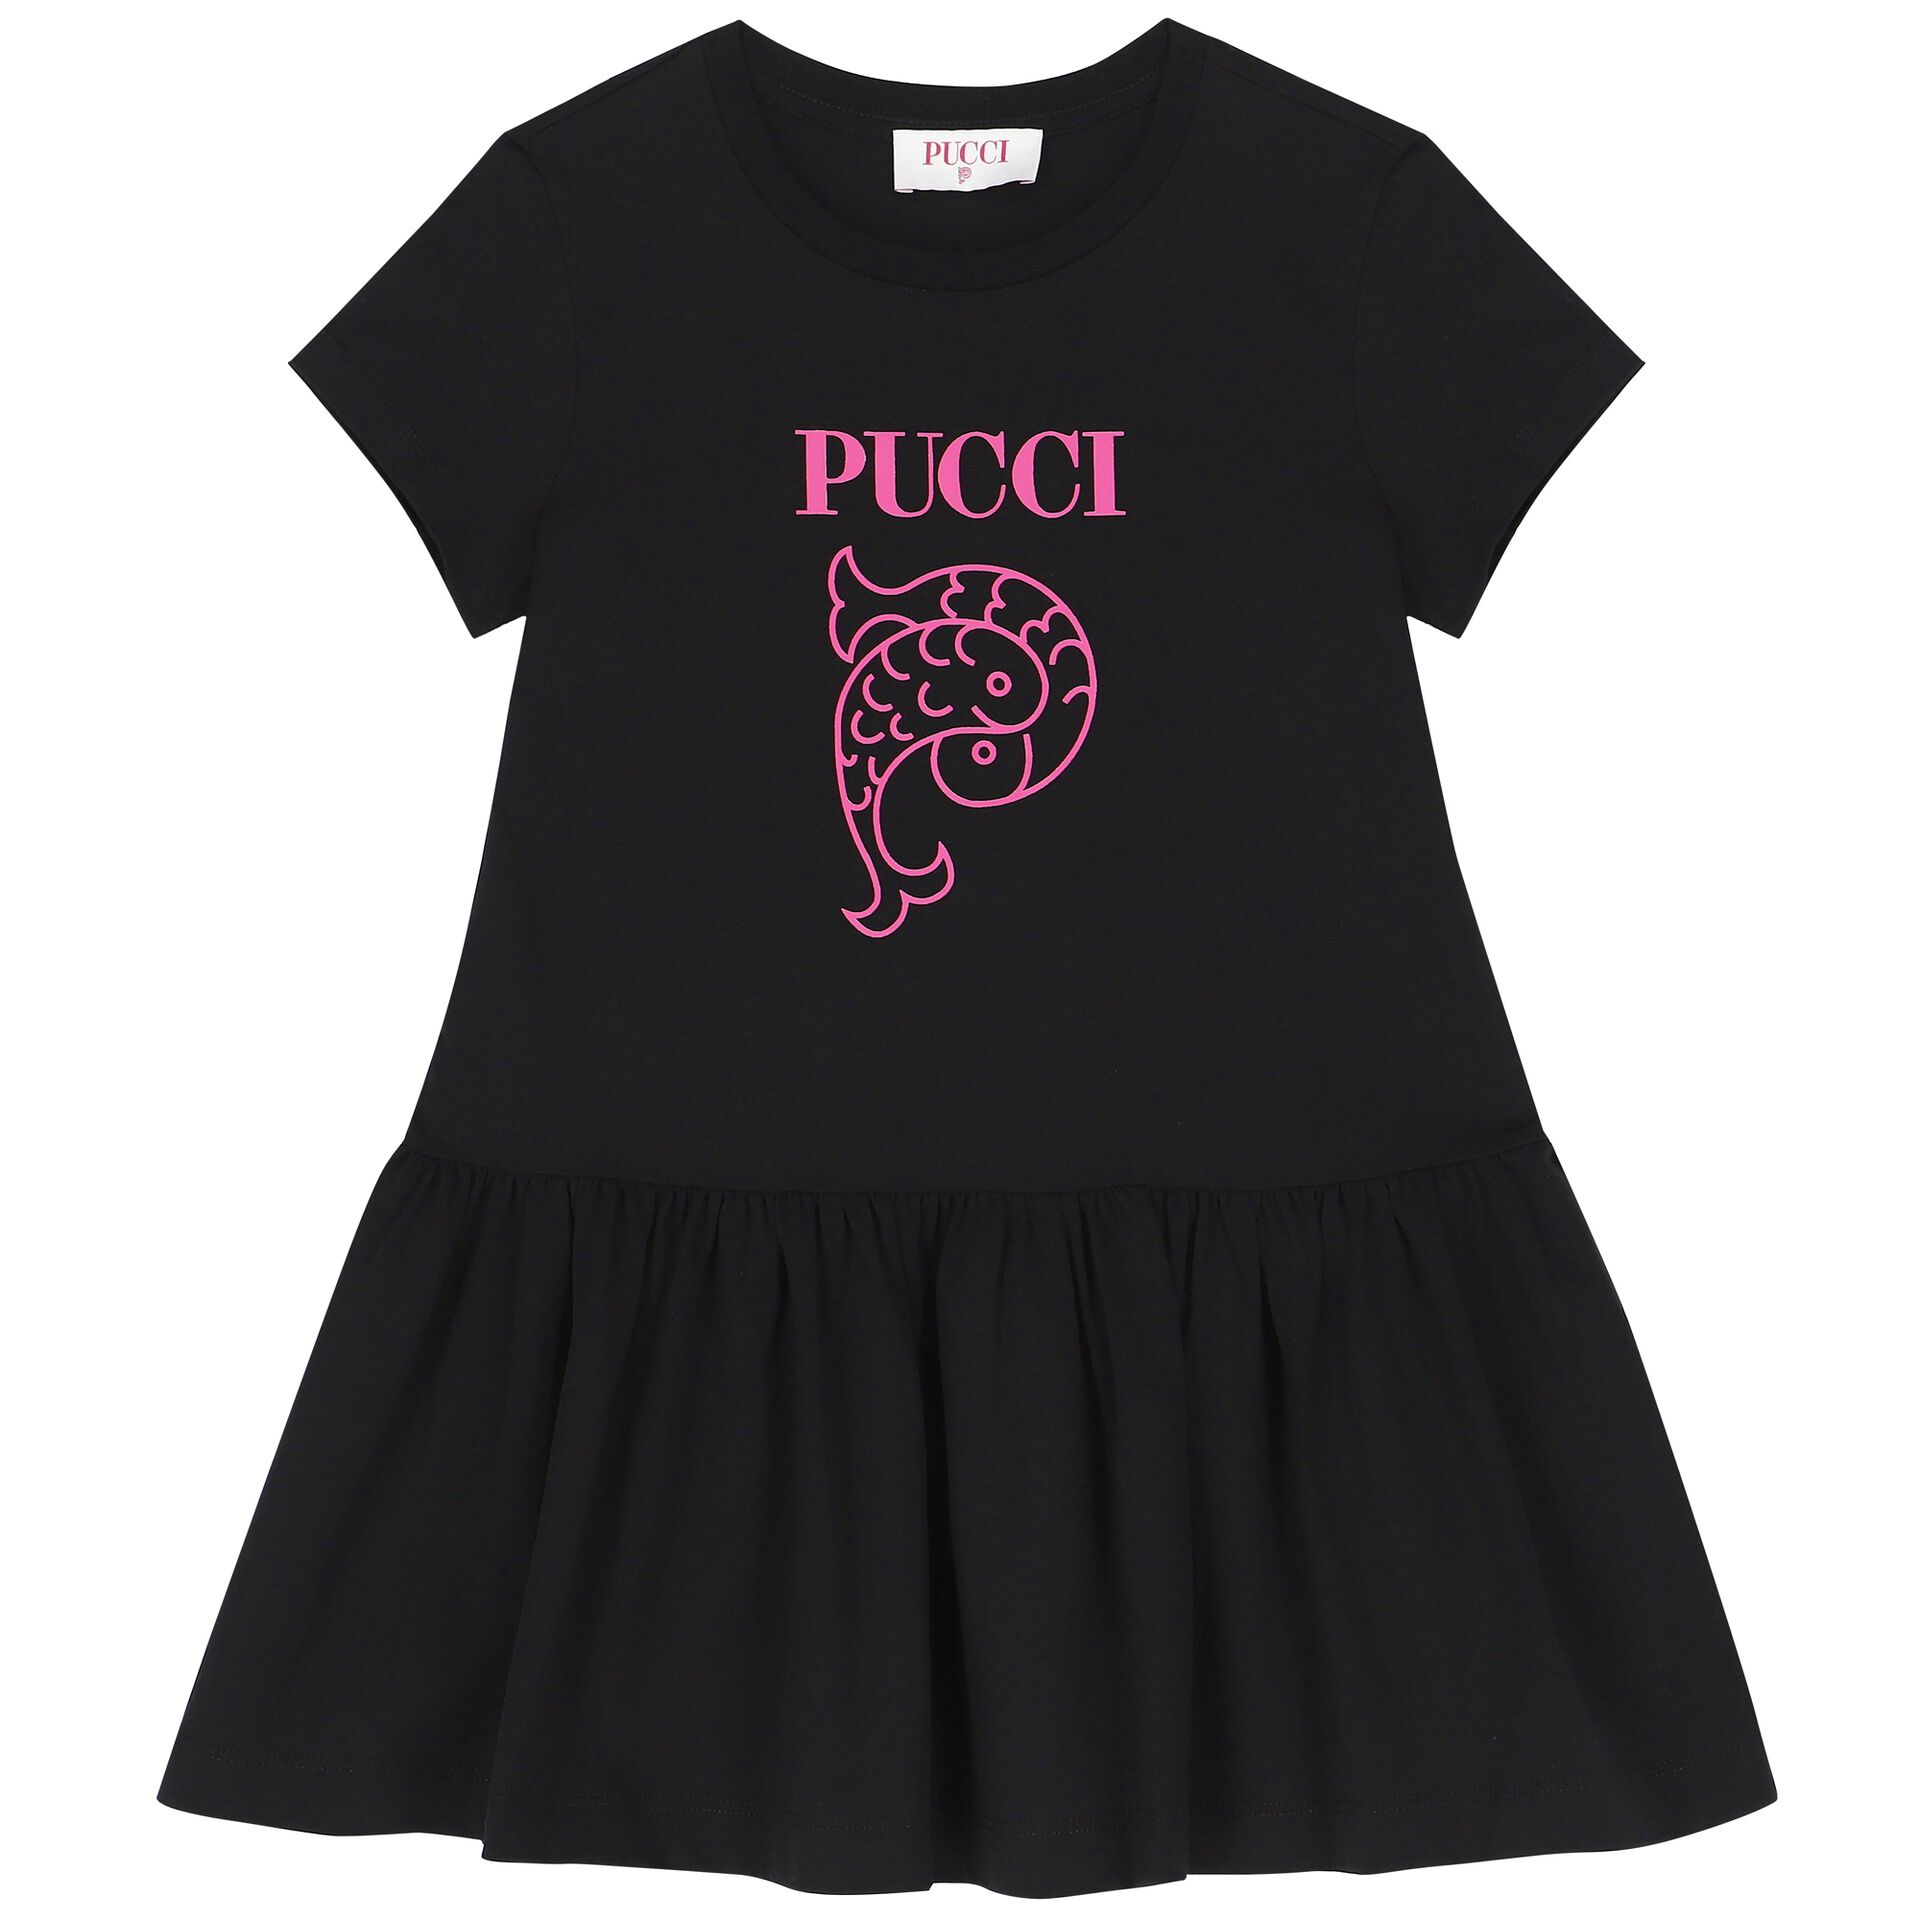 Pucci Kids & Baby by Emilio Pucci | Junior Couture USA USA